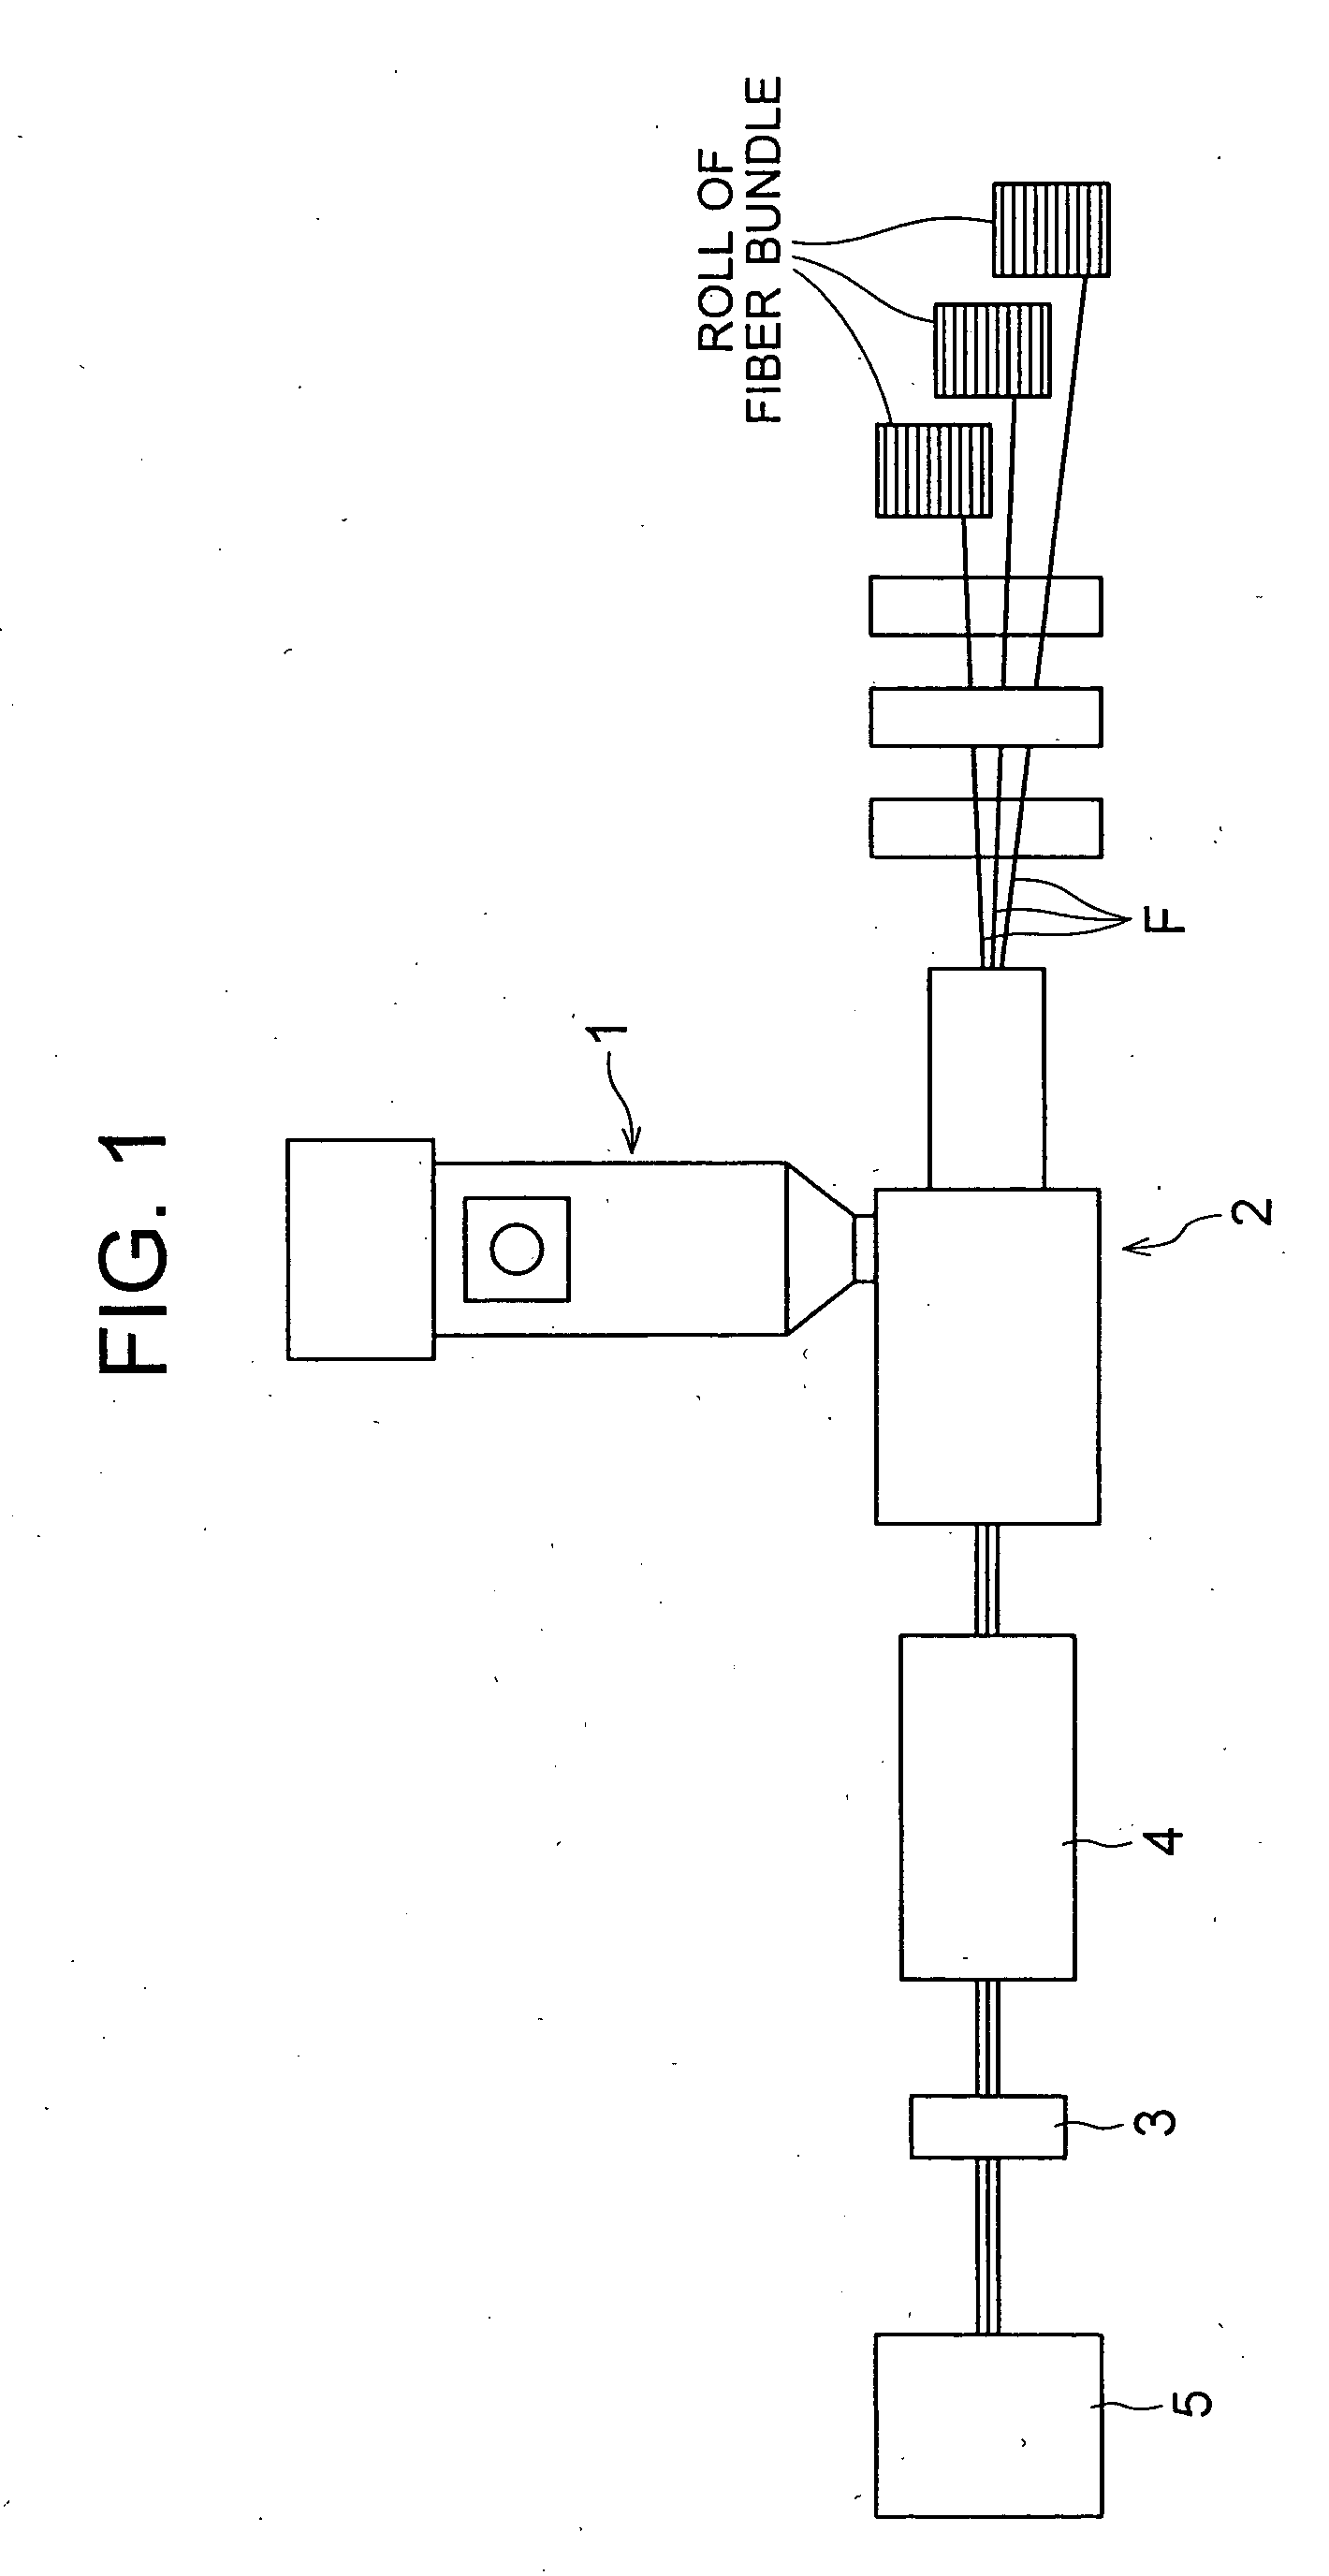 Fiber-reinforced resin composition for parts of air intake system of internal combustion engine